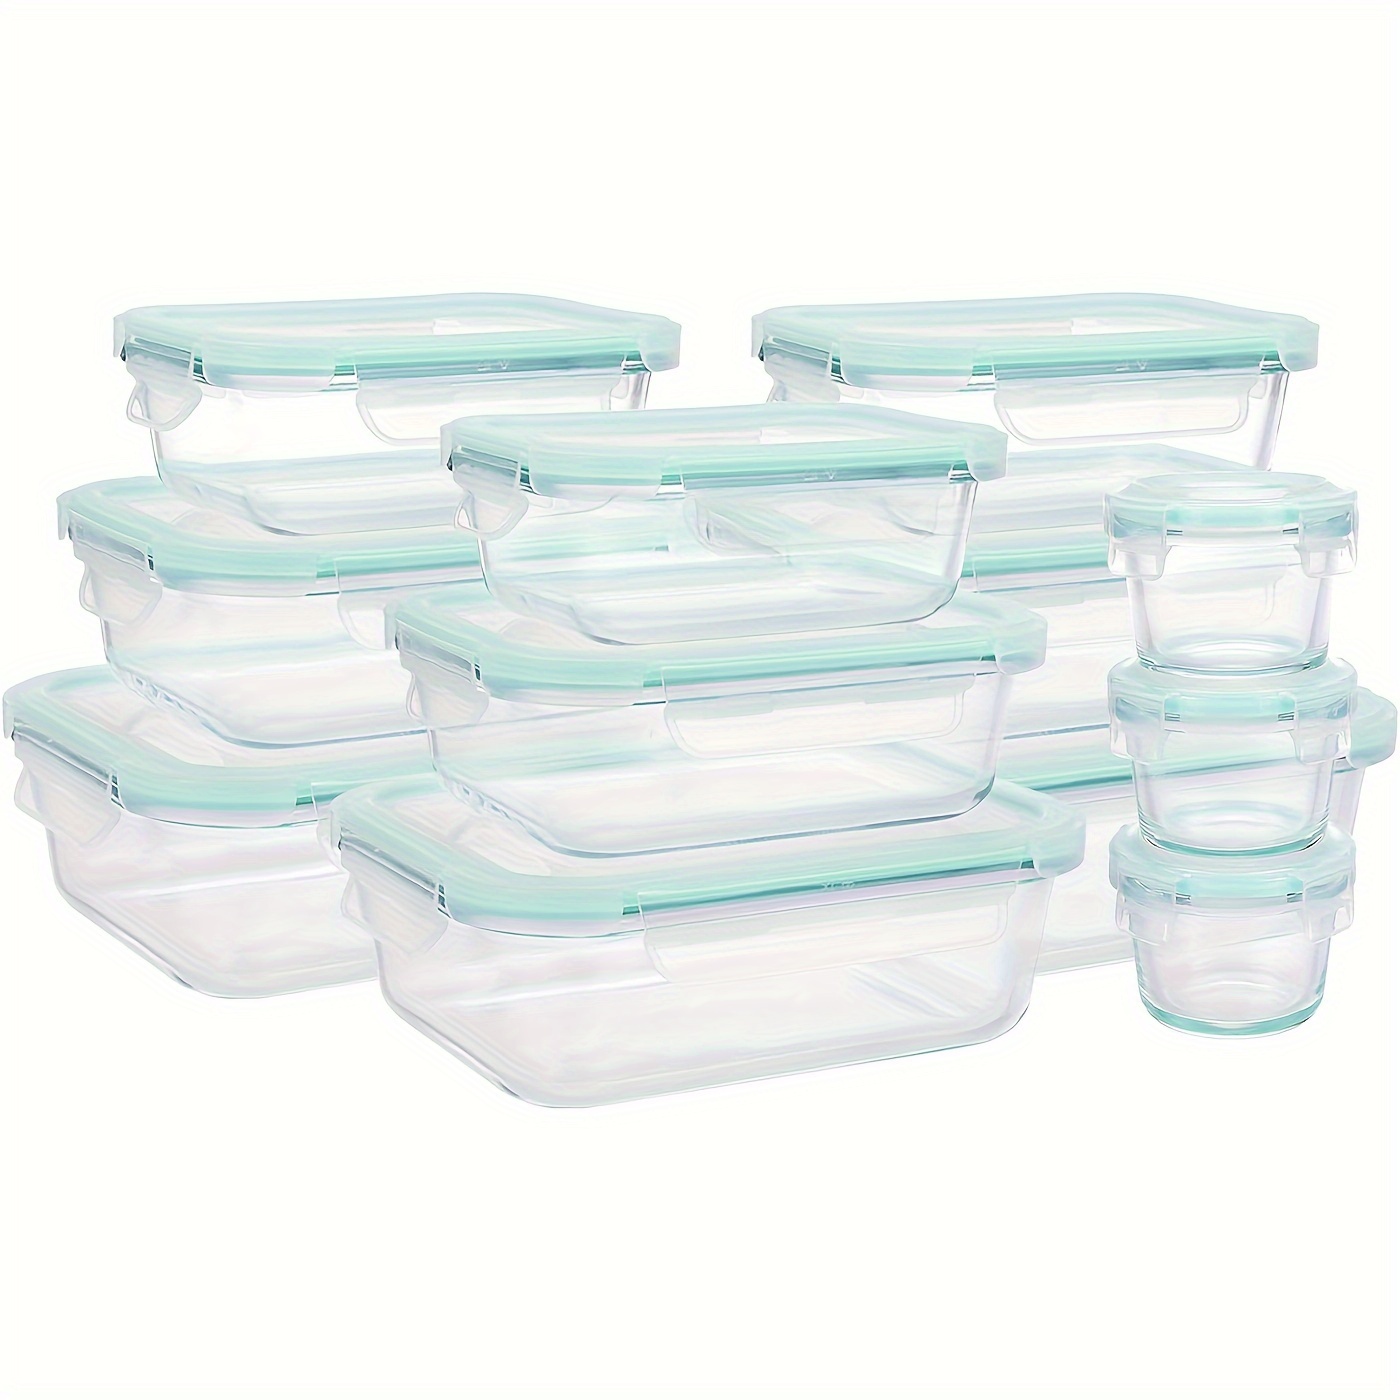 Upgraded Buckle Lock Transparent Food Storage Container With Lid Suitable  For Restaurant Dishwasher Safe for restaurants